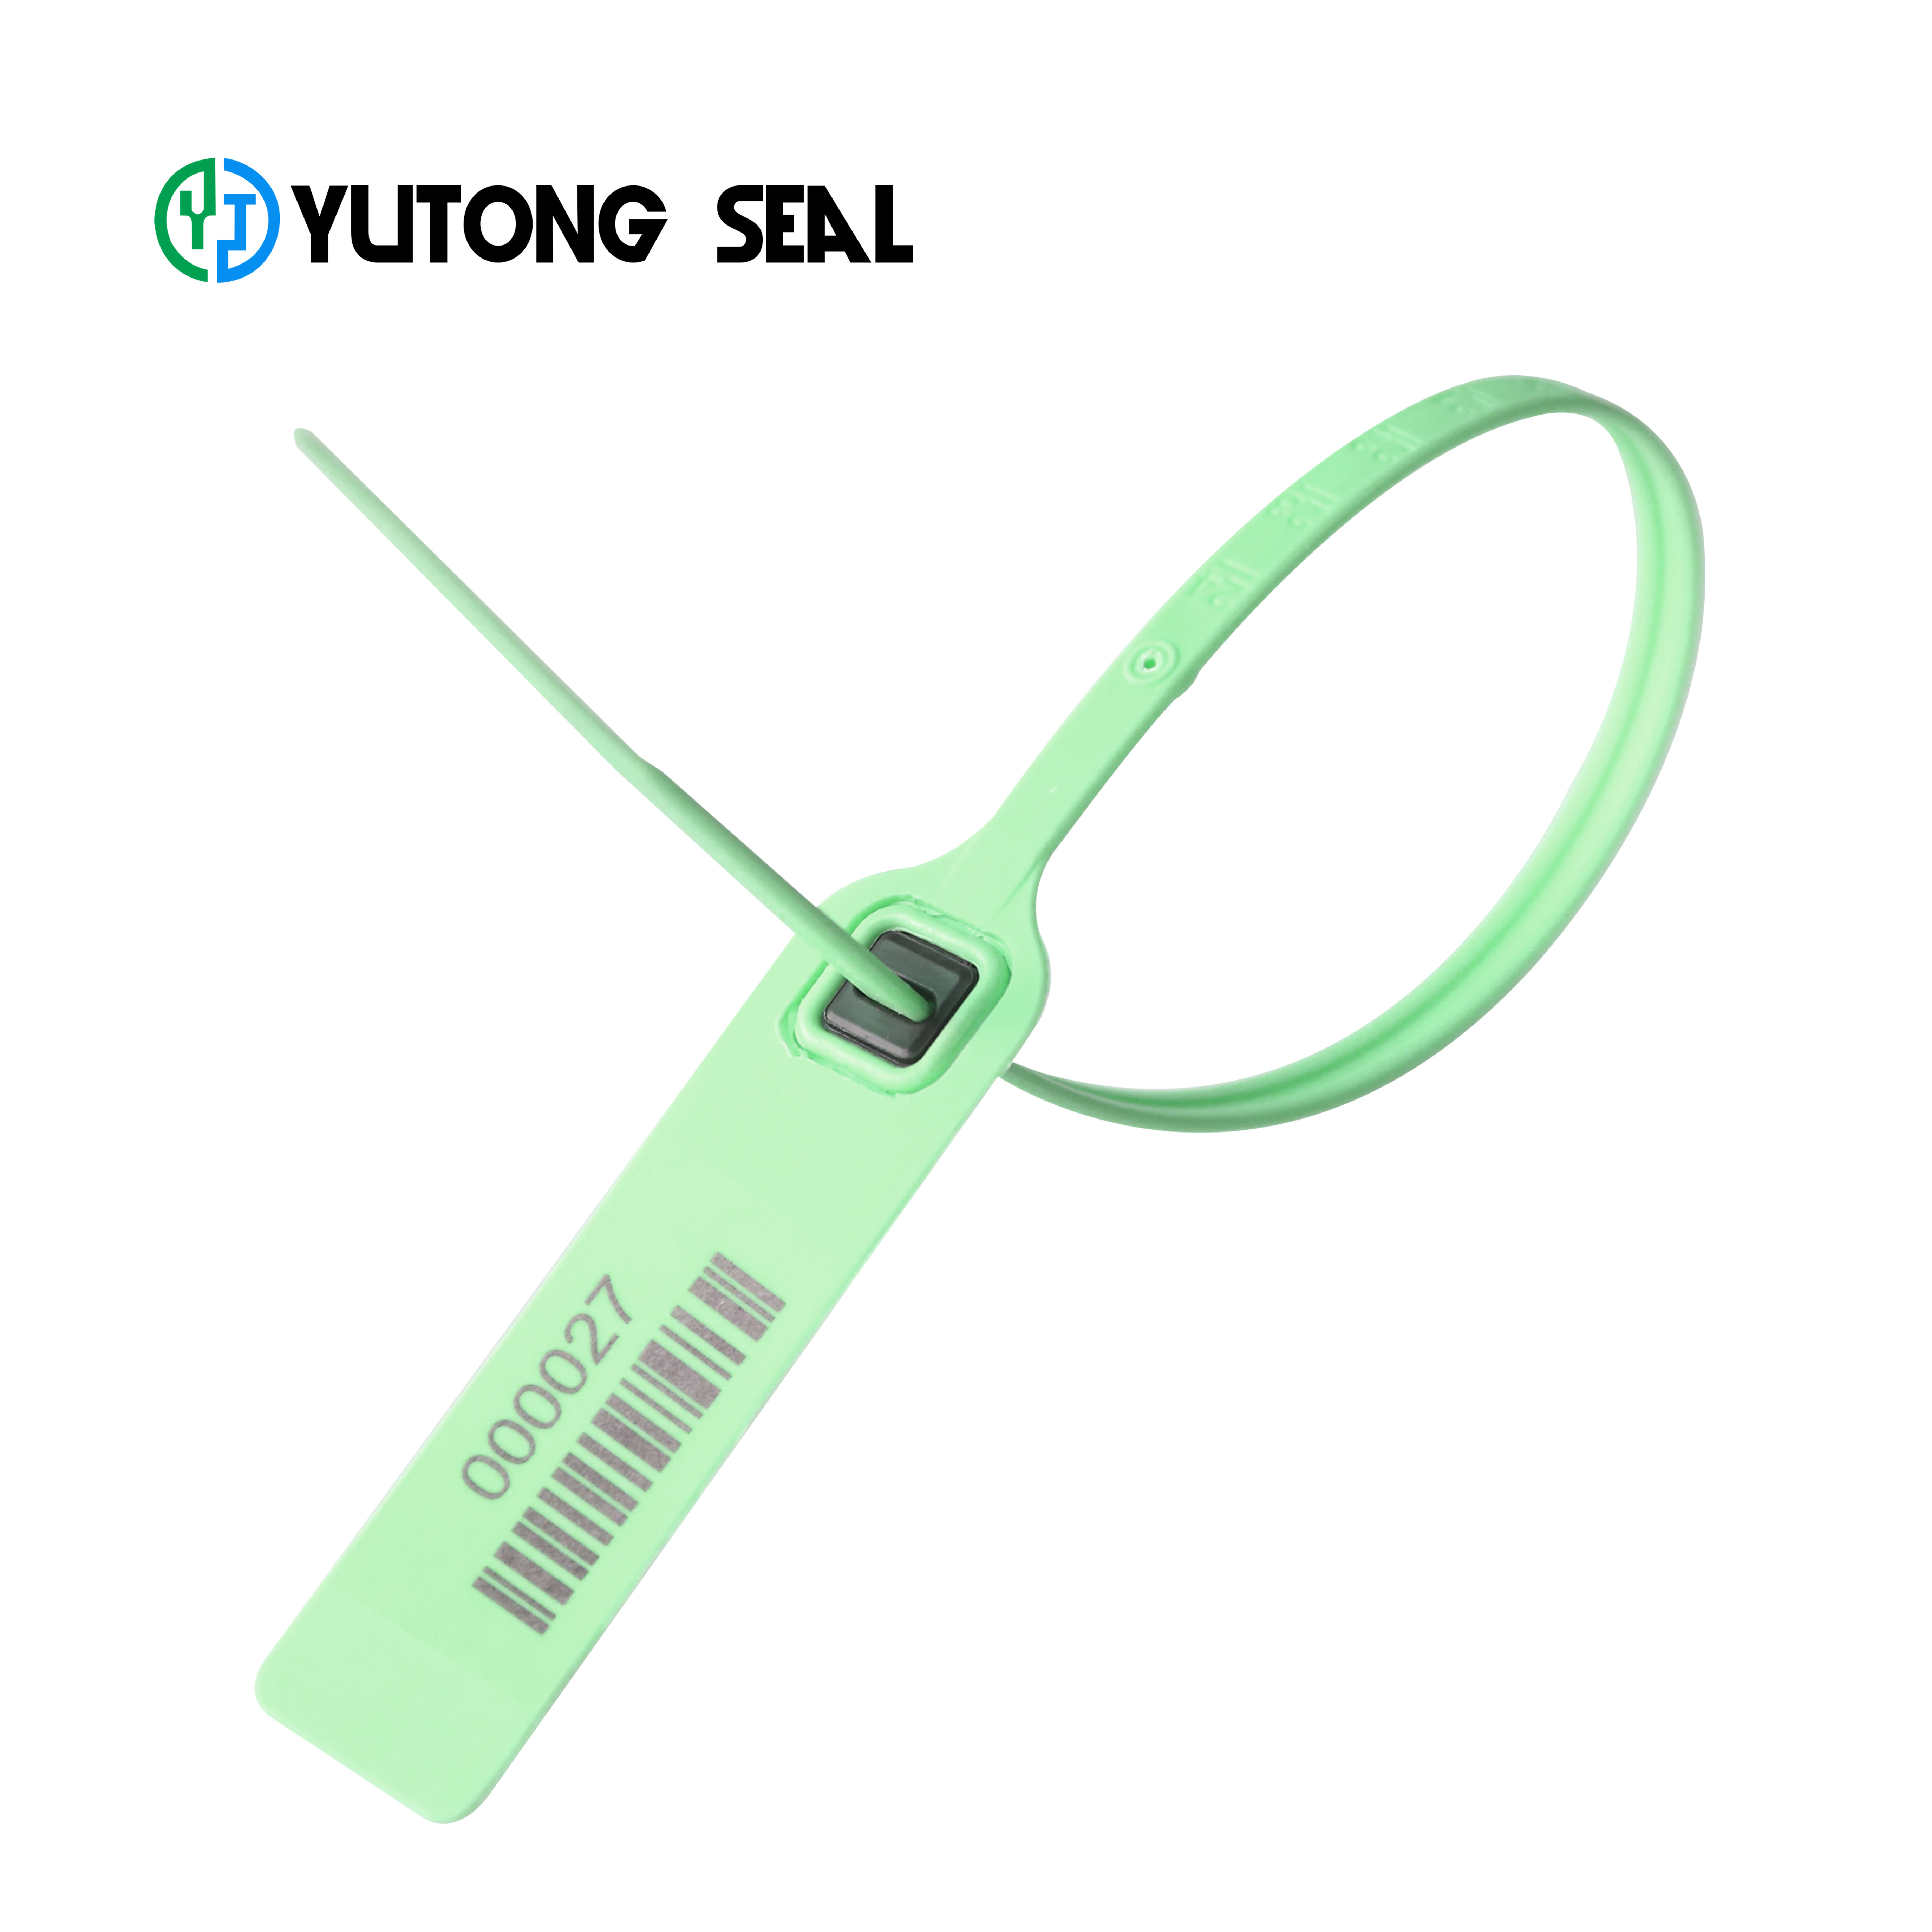 Buy YTPS 601 plastic container seal lock, container lock seal at wholesale prices